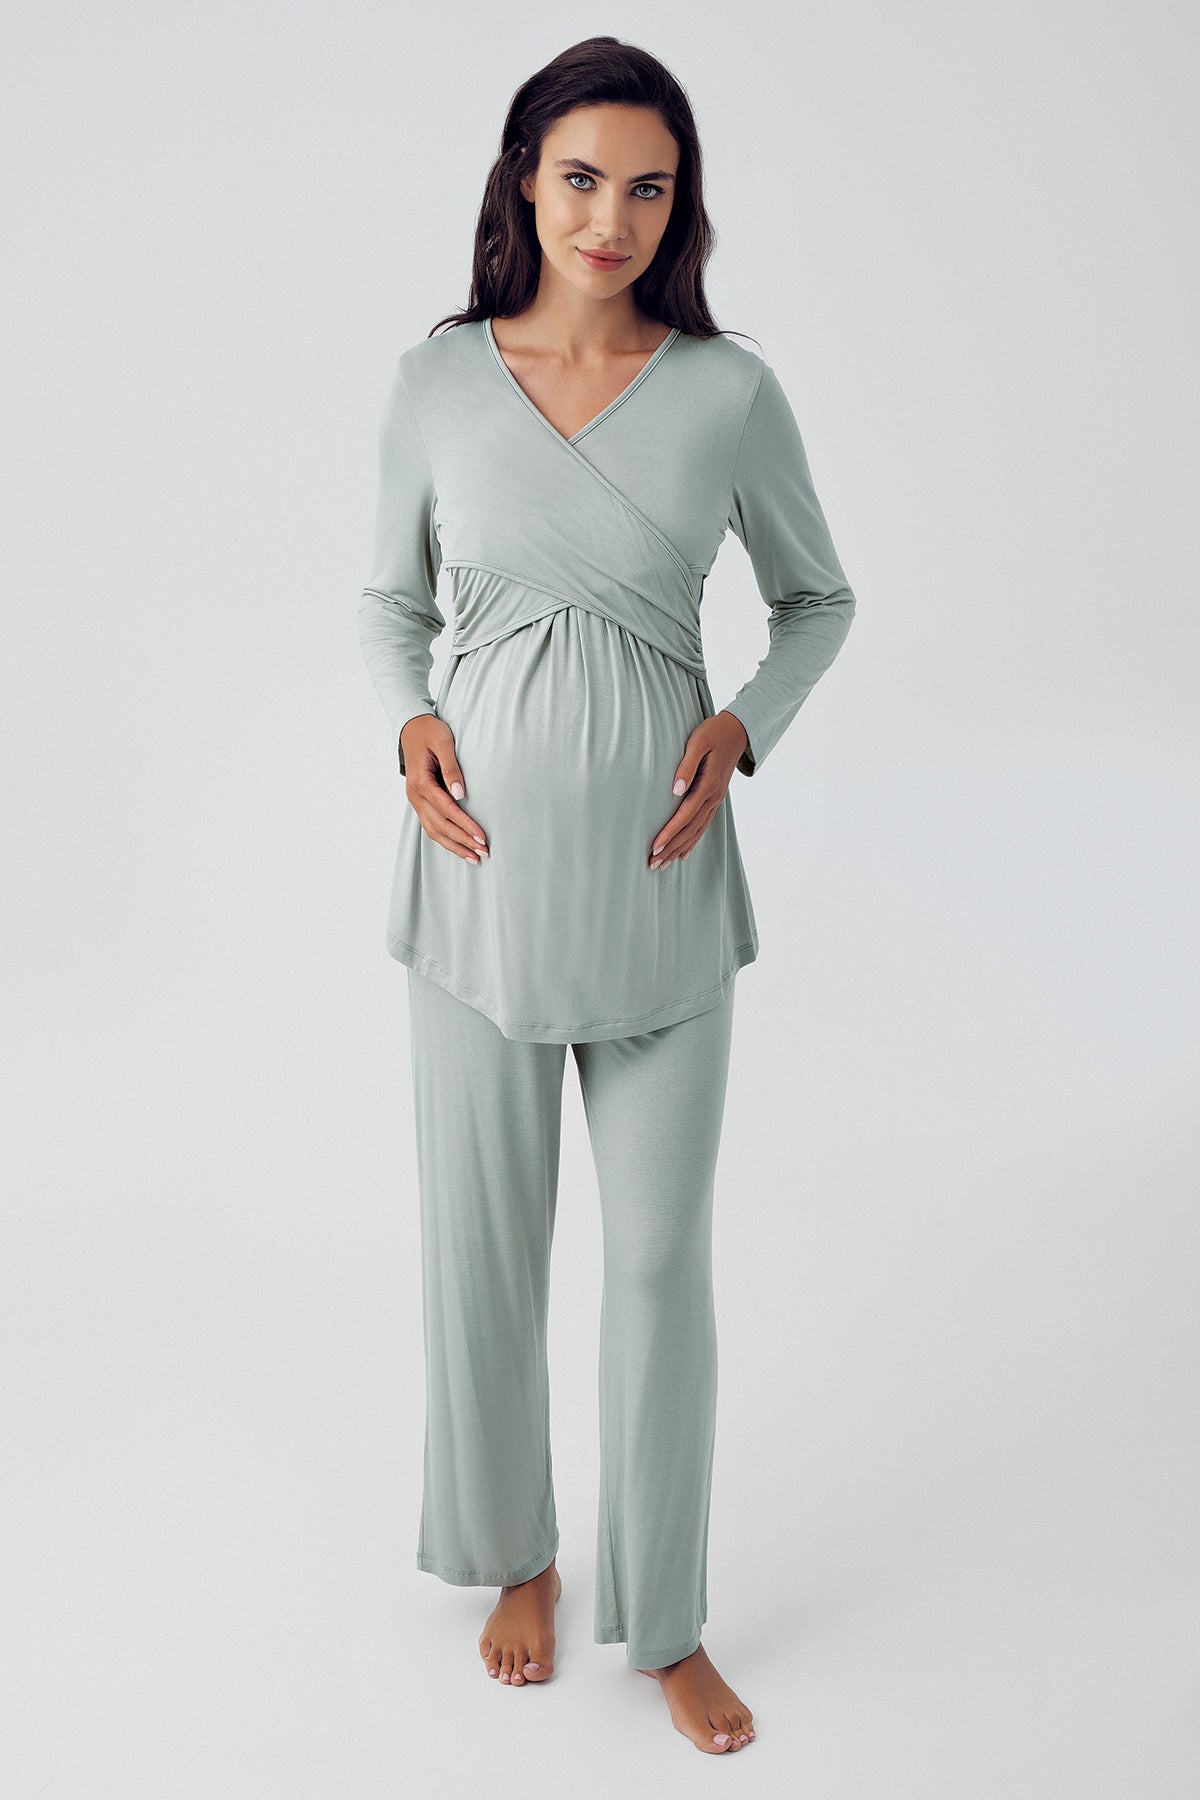 Shopymommy 15205 Cross Double Breasted Maternity & Nursing Pajamas Green